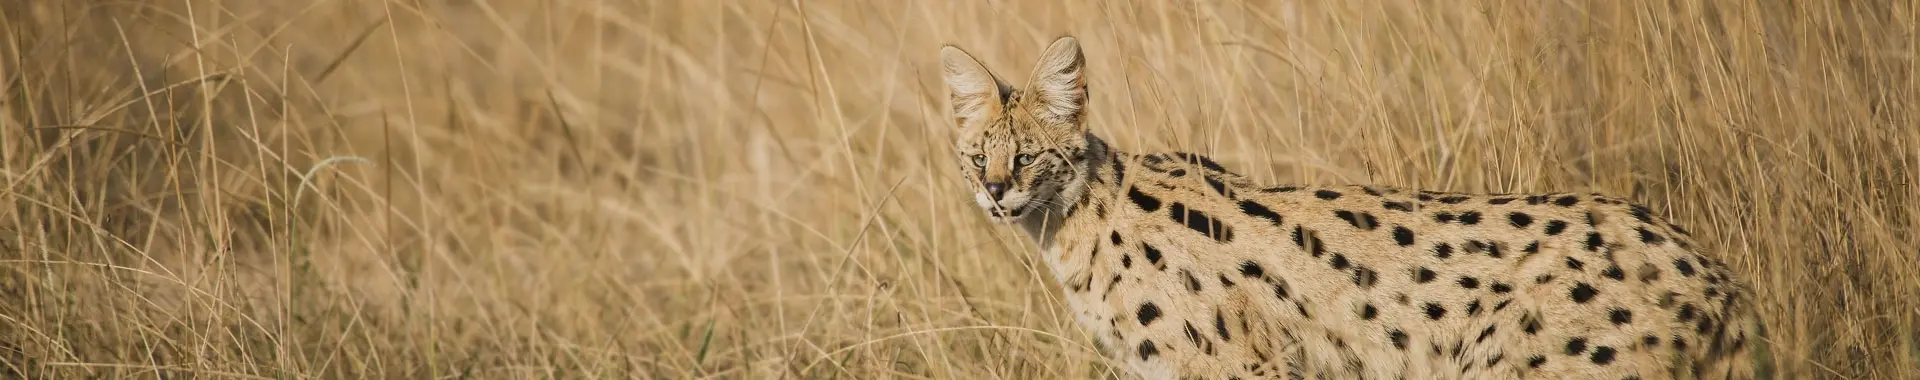 African Serval 